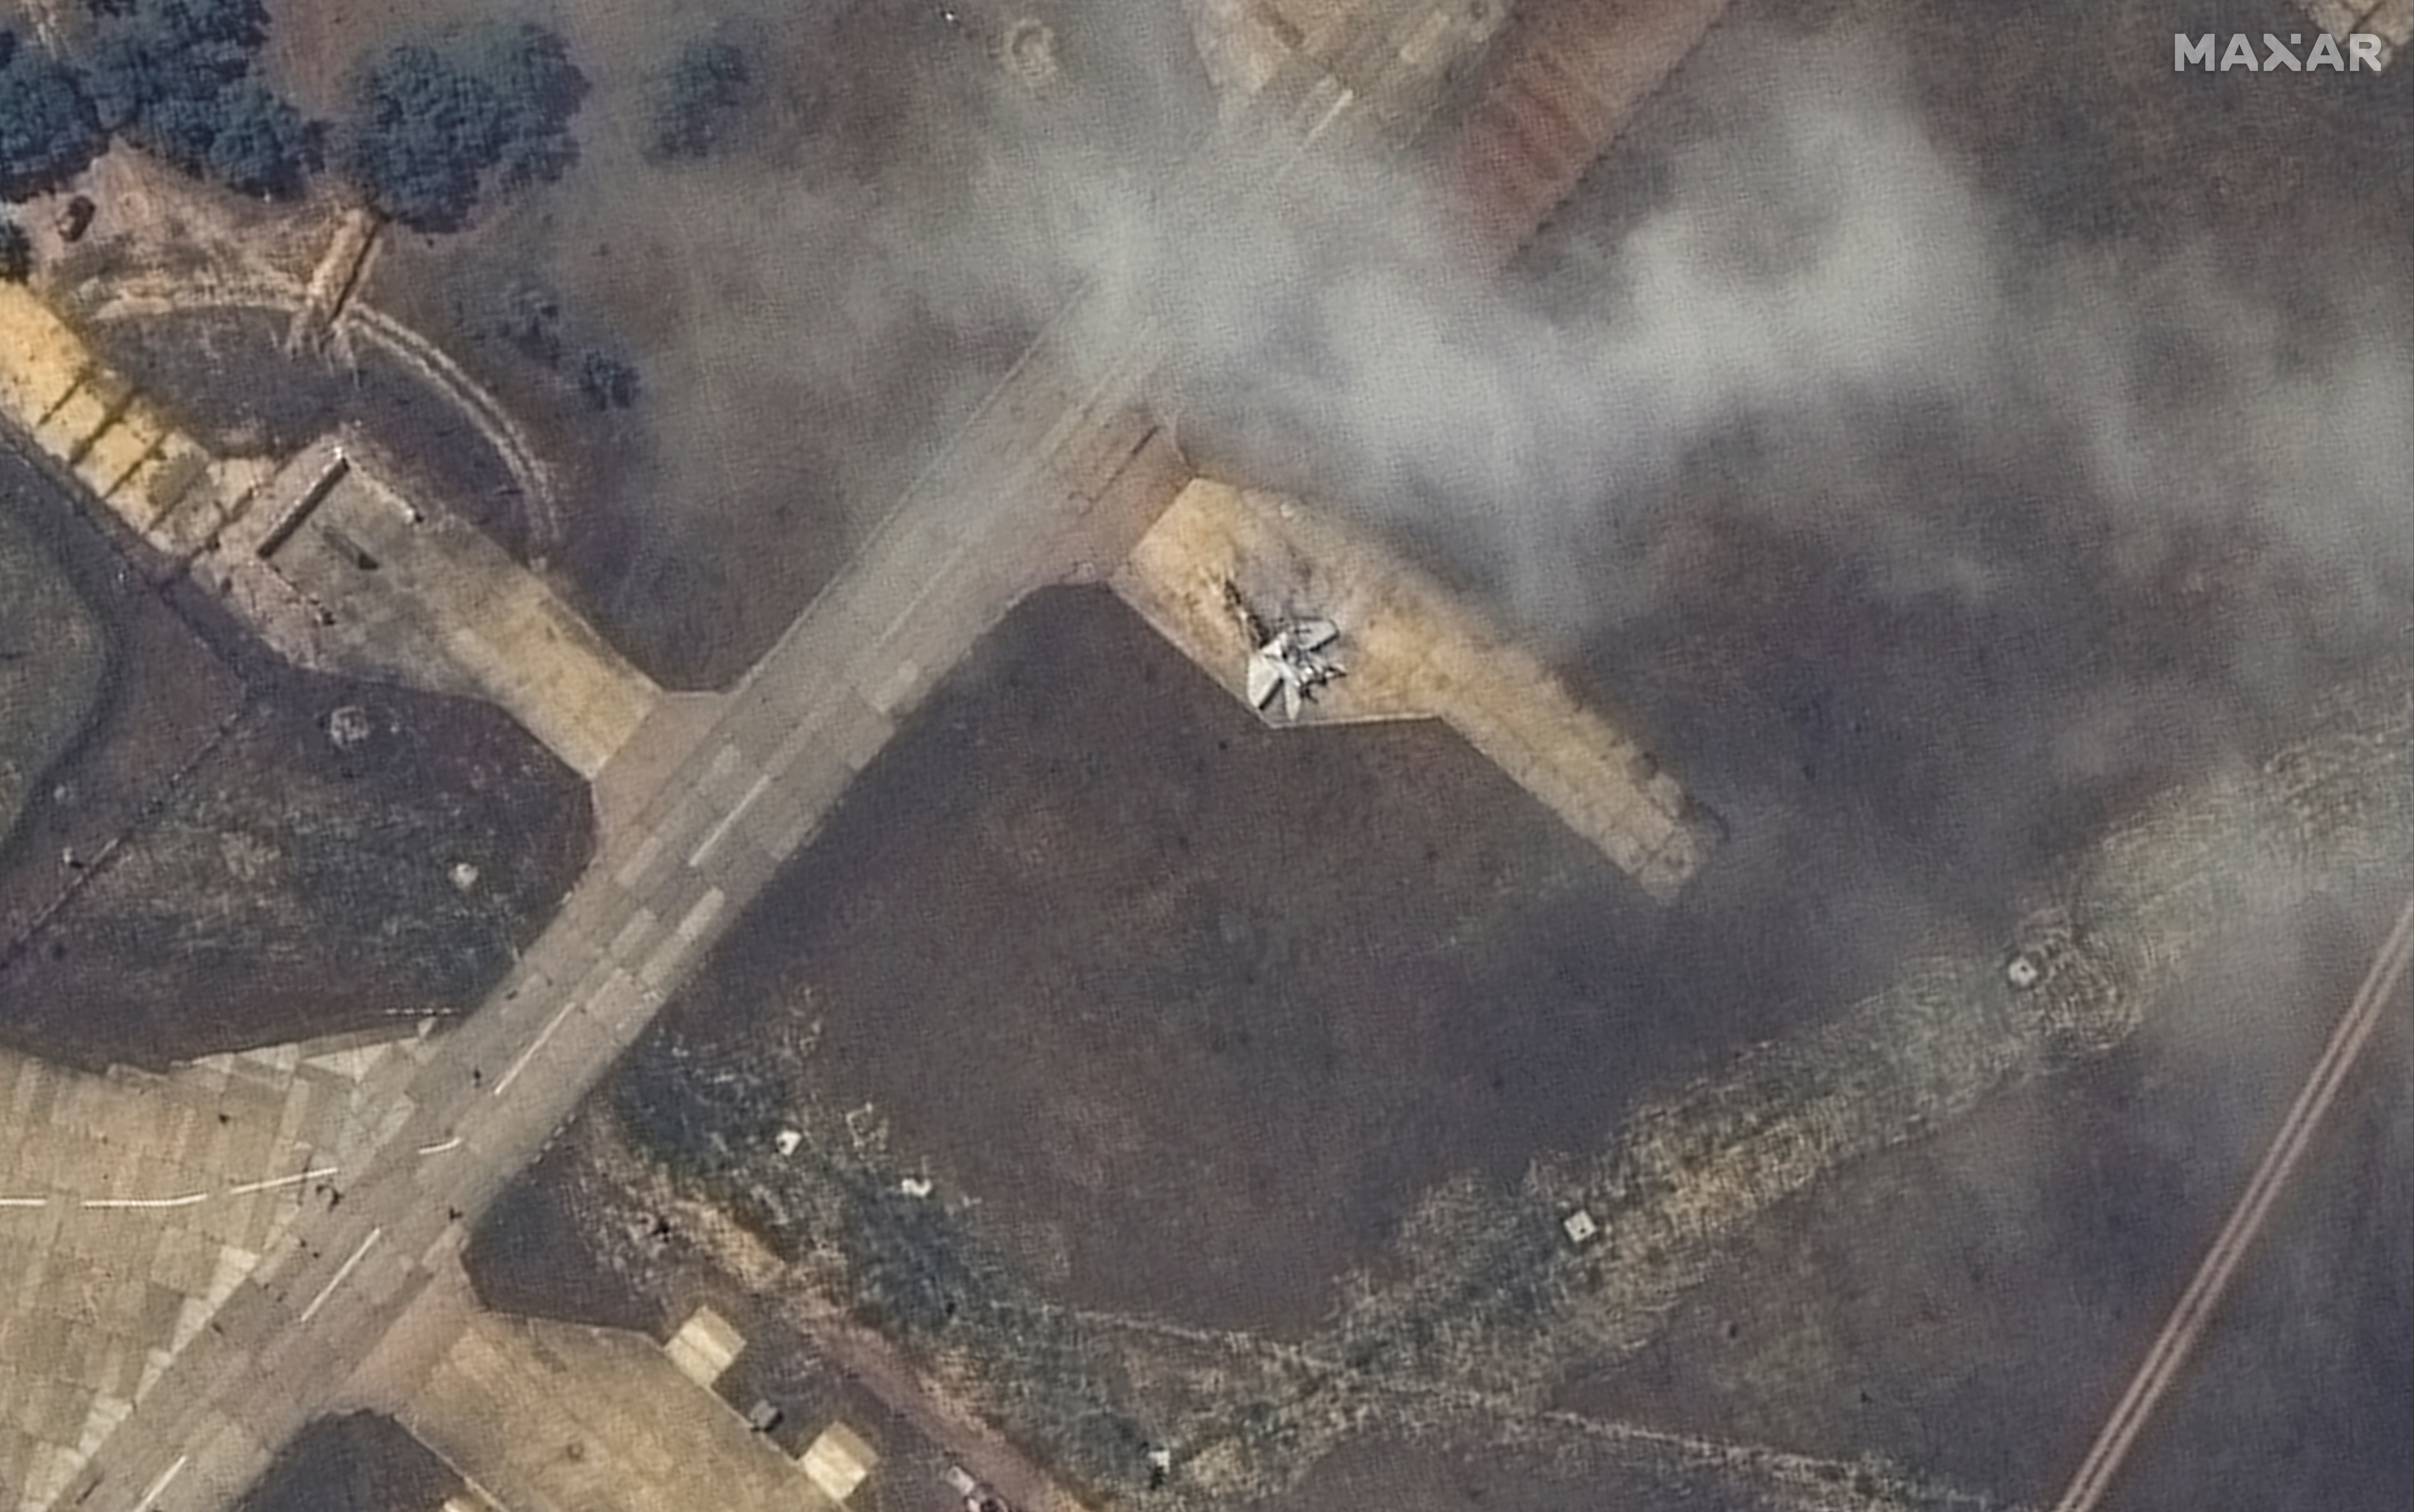 A satellite image shows what appears to be a damaged MiG29 fighter following an attack at Belbek Airbase, amid Russia's attack on Ukraine, in Crimea